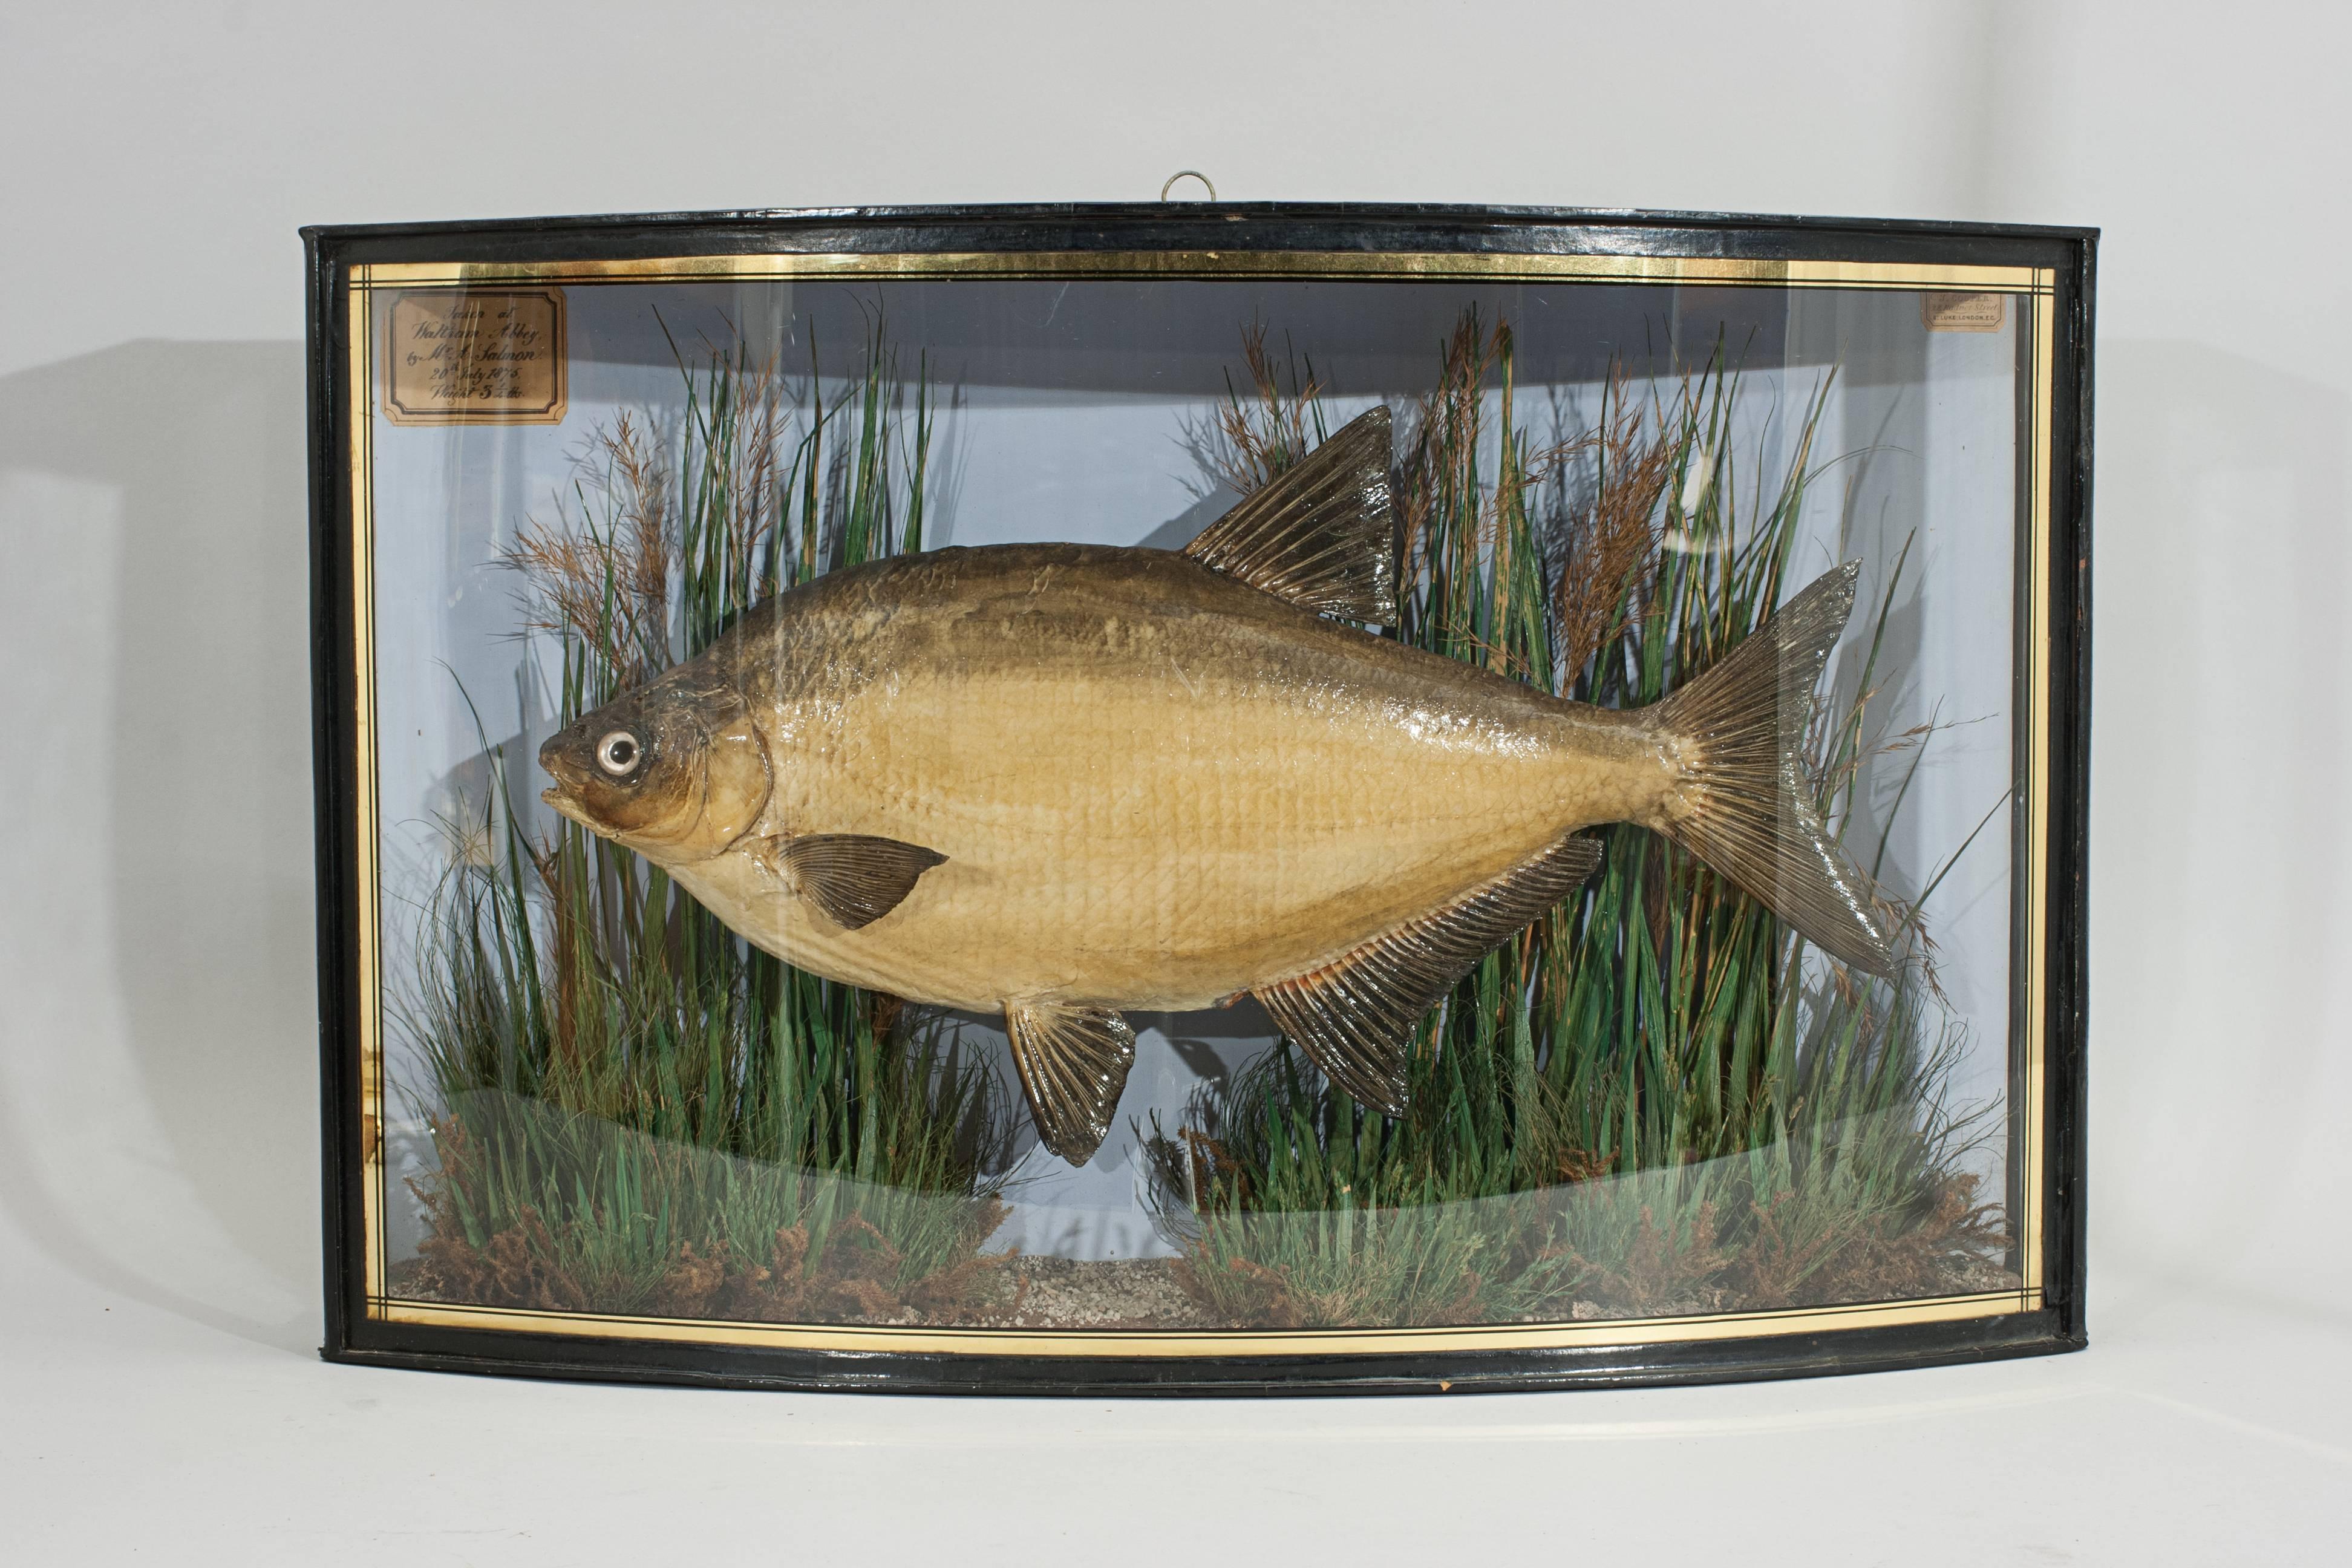 Taxidermy. Preserved cooper fish.
A cased bream by Copper in a nice bow fronted case with gilt lines. There is a paper inscription inside 'Taken at Waltham Abbey by Mr. A. Salmon, 20th July 1875, Weight 3 1/4lbs'. The case contains a cleverly